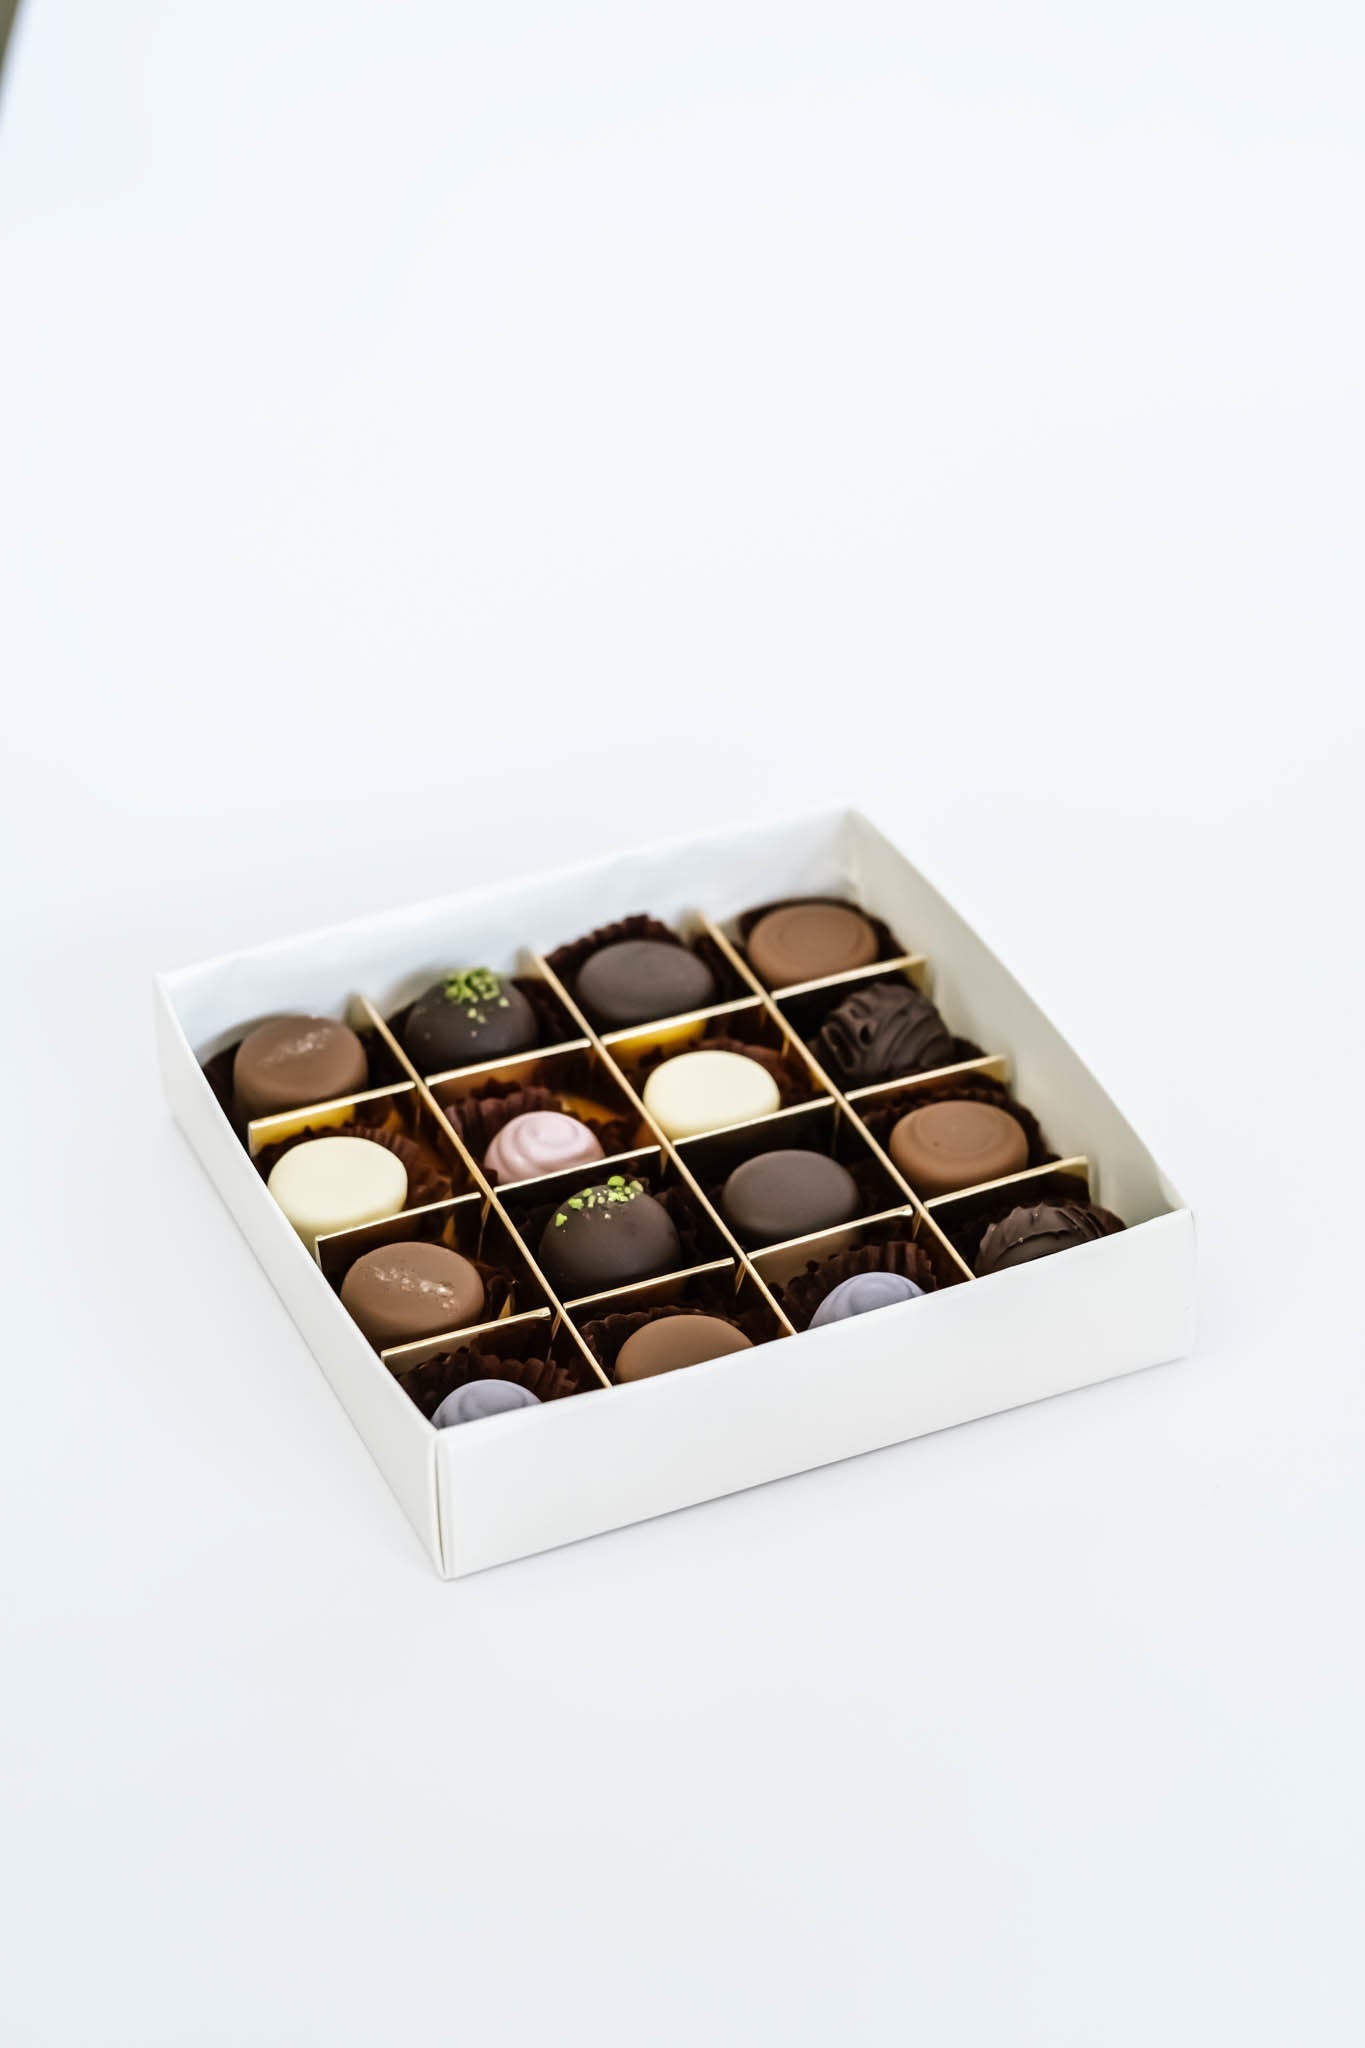 16 Pieces - Truffles Chocolate Boxes (build your box)